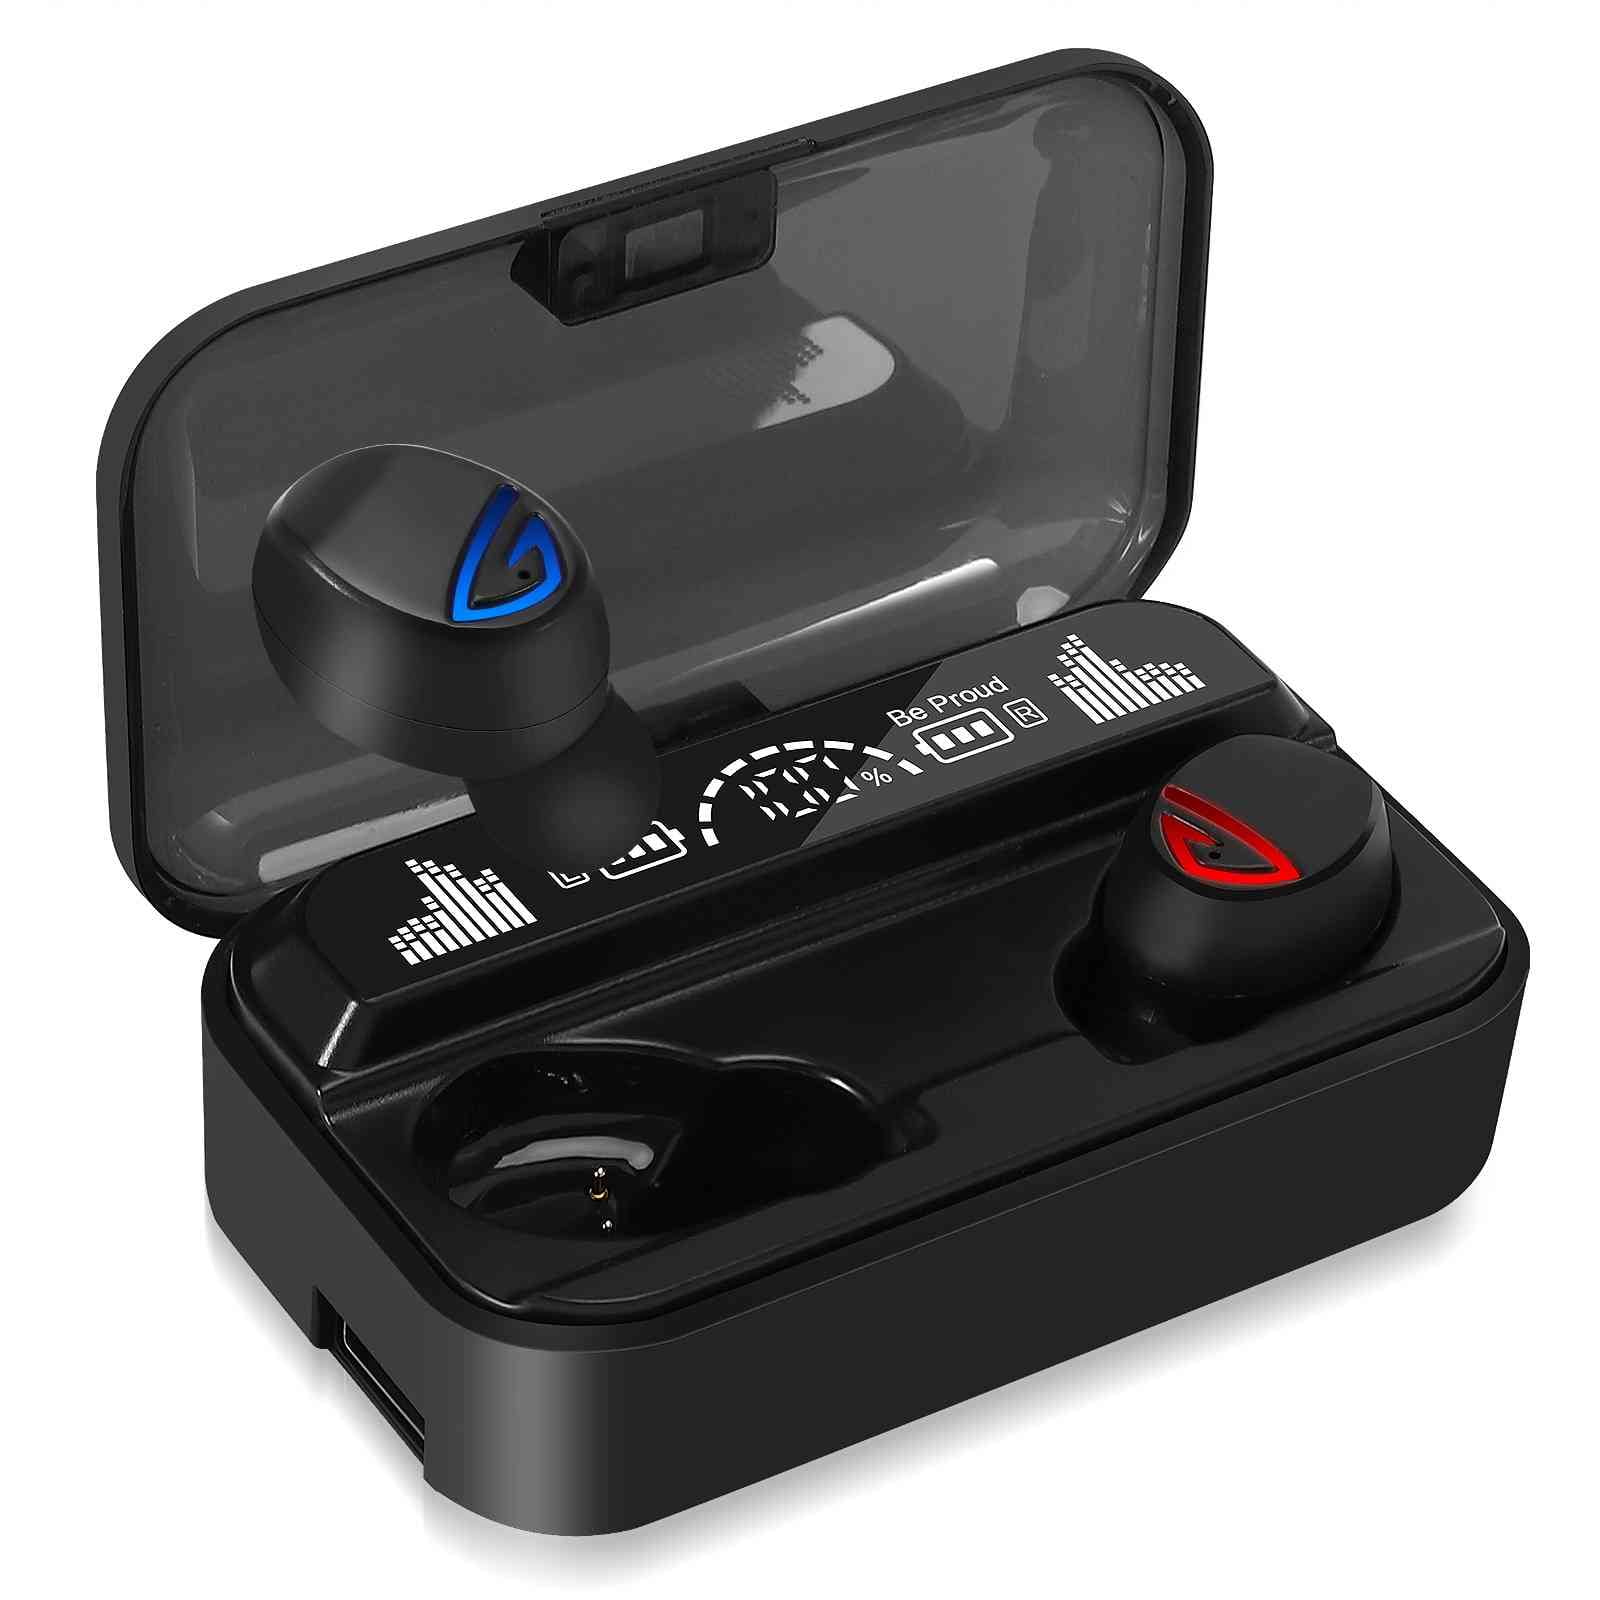 UrbanX Bluetooth Wireless Earbuds – 35H Play time, IPX8 Water Resistant,  One-Step Pairing, Emergency Power Bank, LED Display, Ergonomic Design - for 